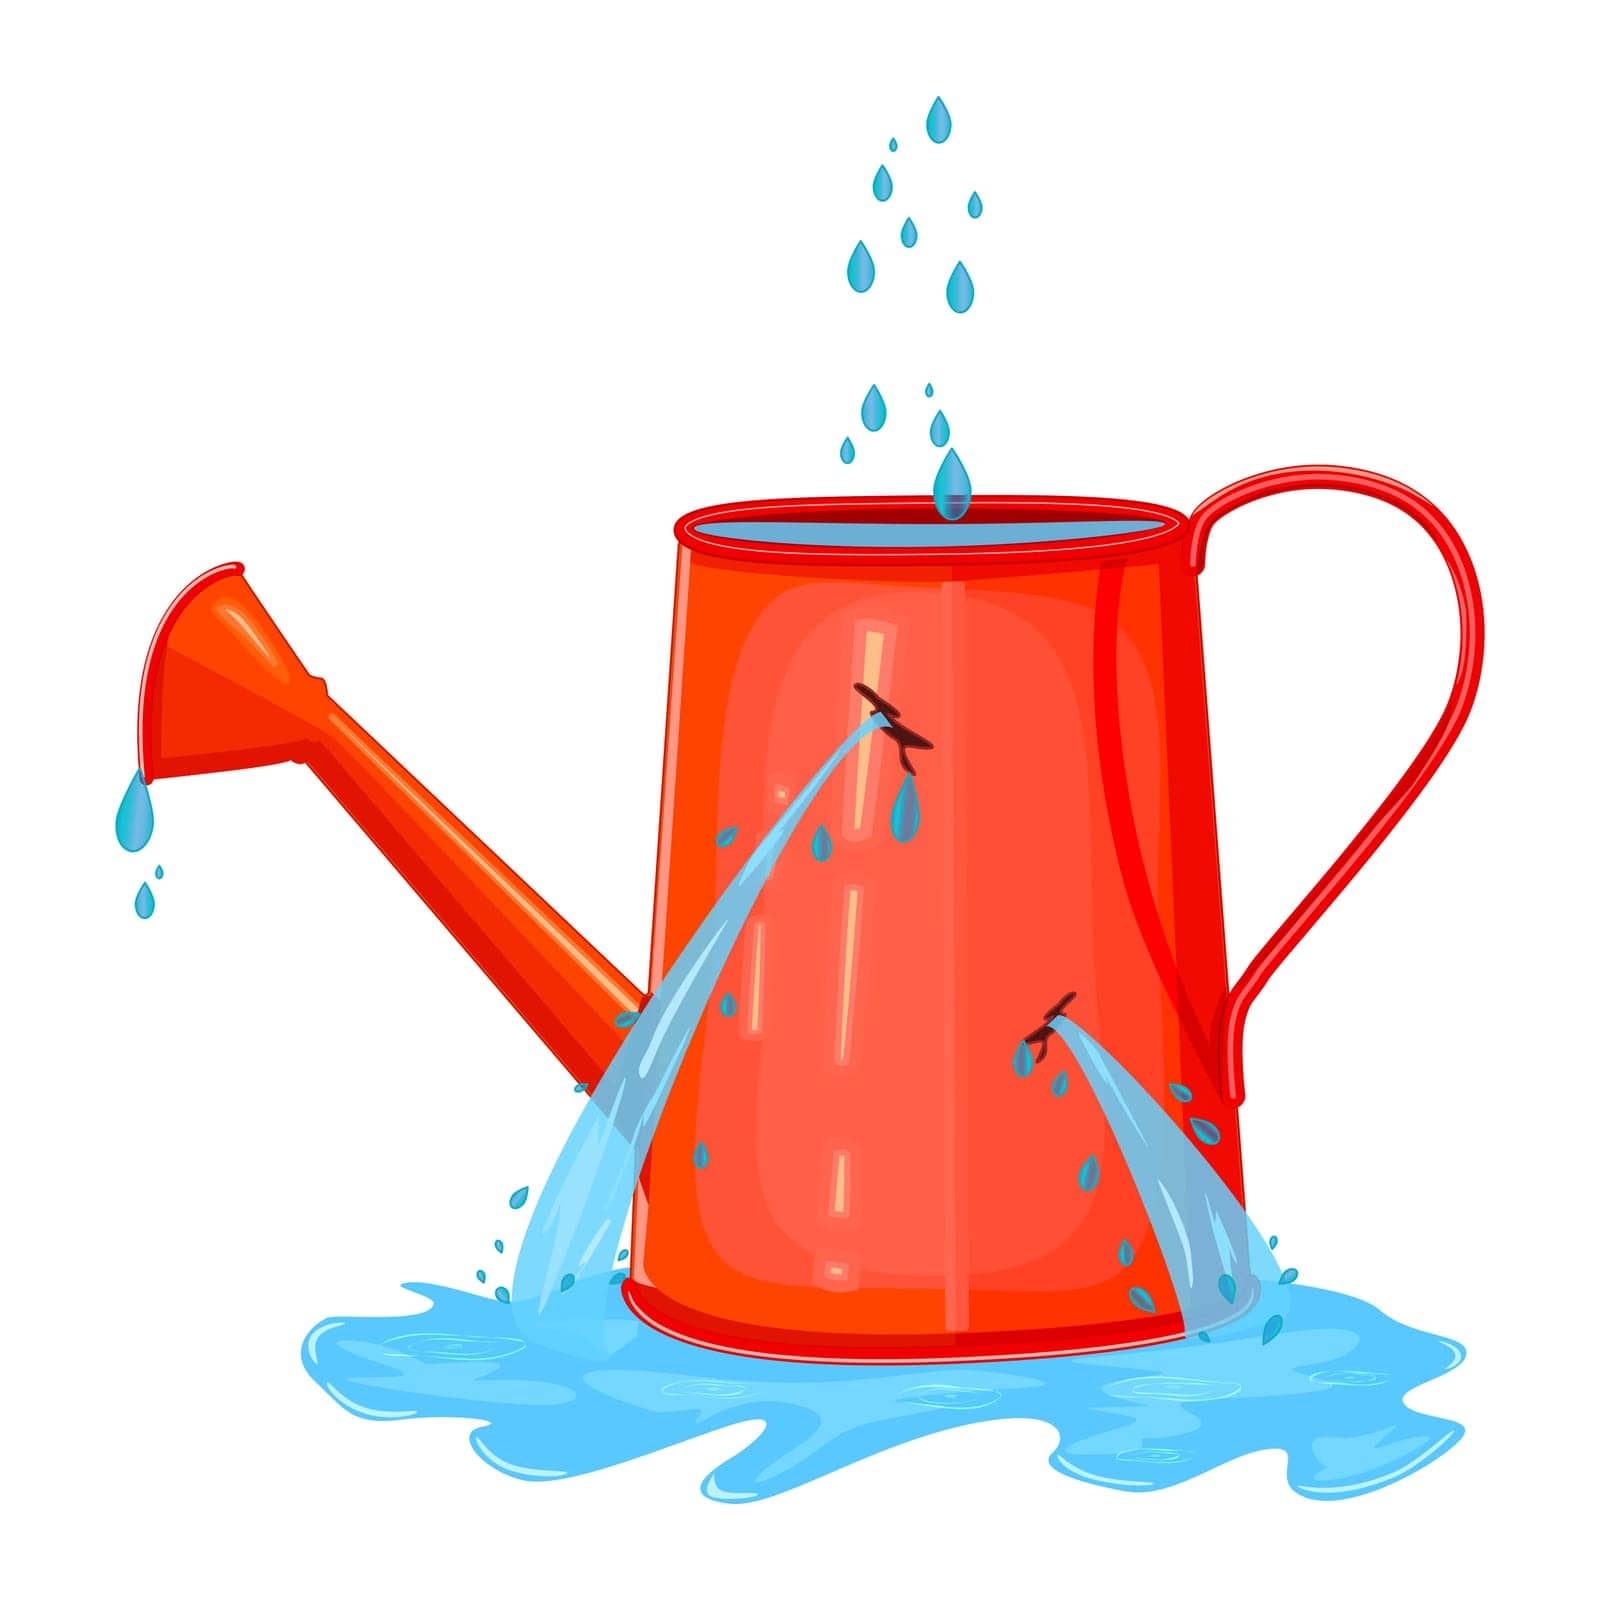 Water leaking from broken watering pot. Useless red watering can. Water is poured out of hole in old watering can. Cracked red  hose. Stock vector illustration